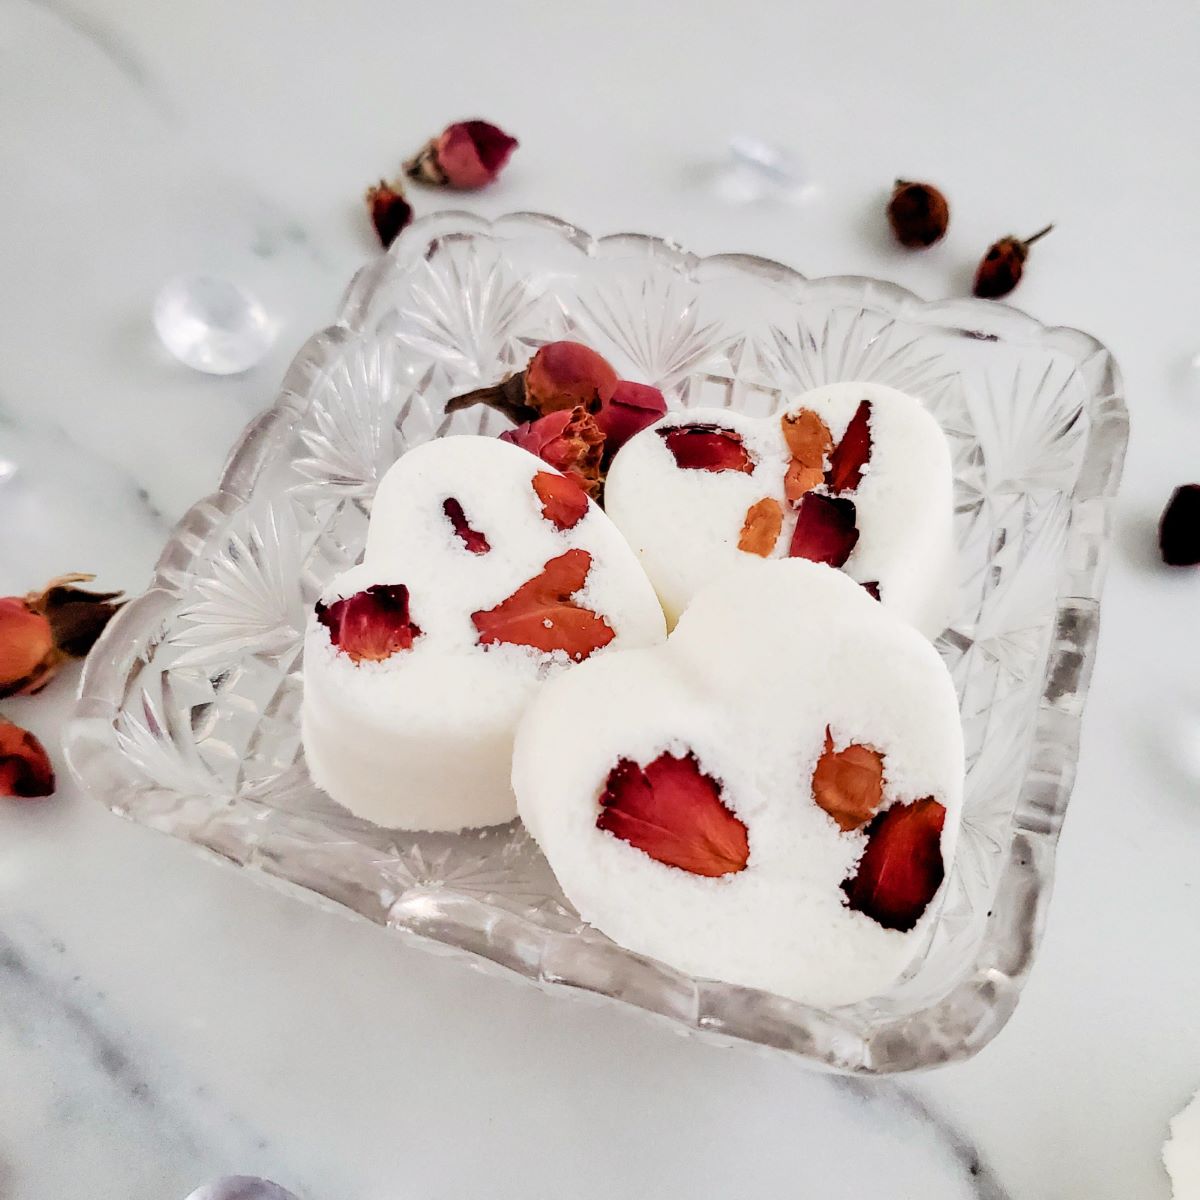 Rose Petal Bath Bombs in a glass dish on a counter top.